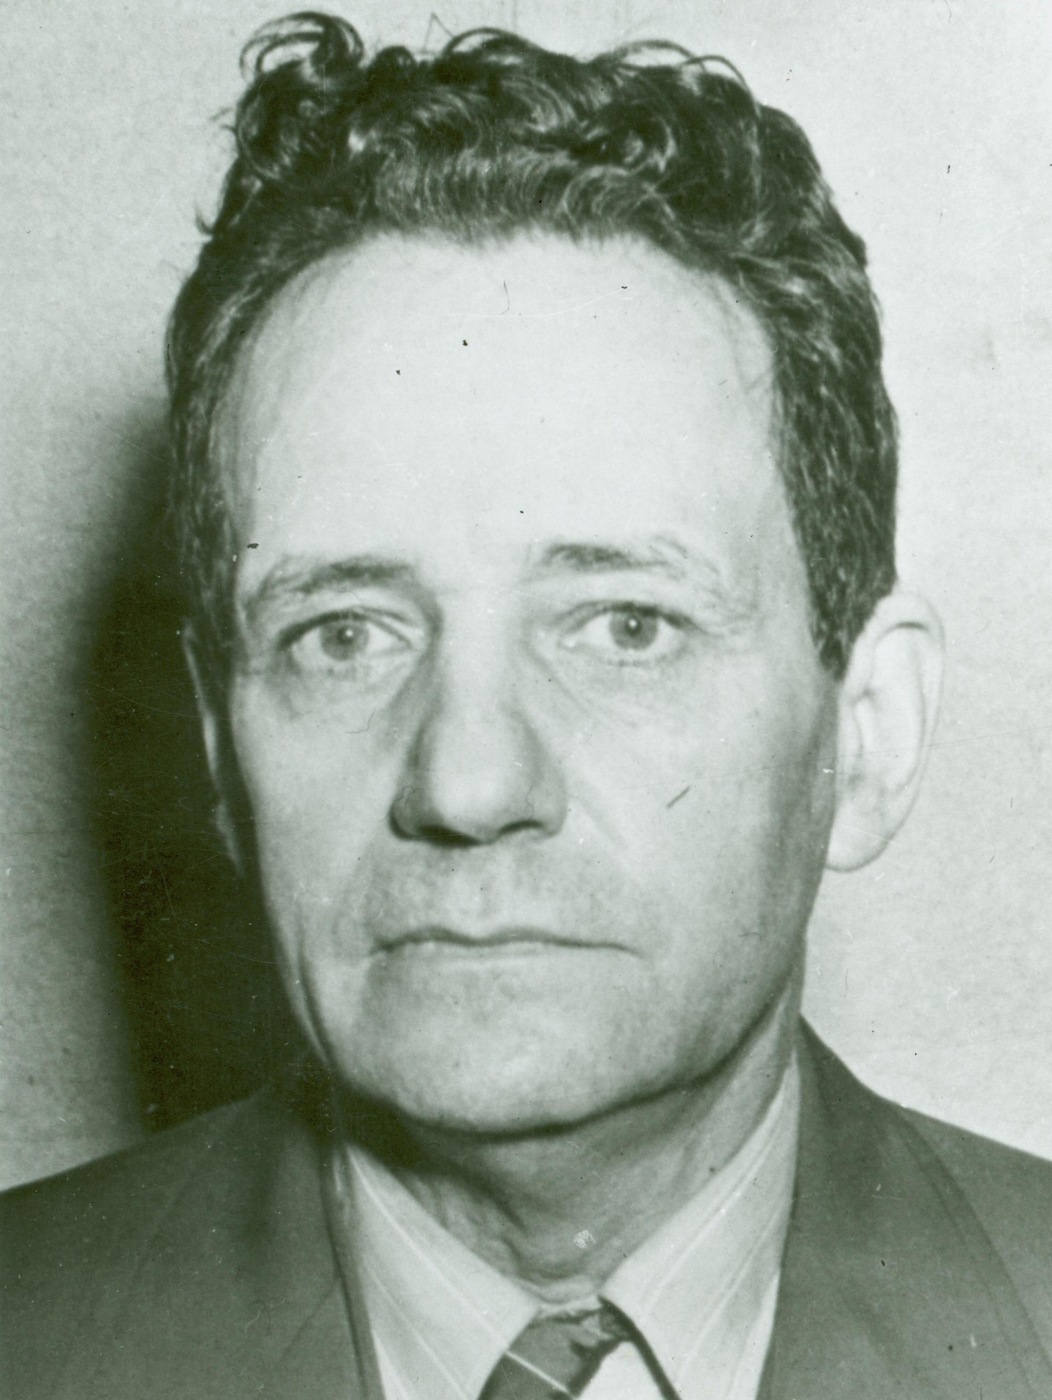 Mug shot of Fritz "Frederick" Duquesne, leader of the German spy-ring in the United States, arrested in June 1941.